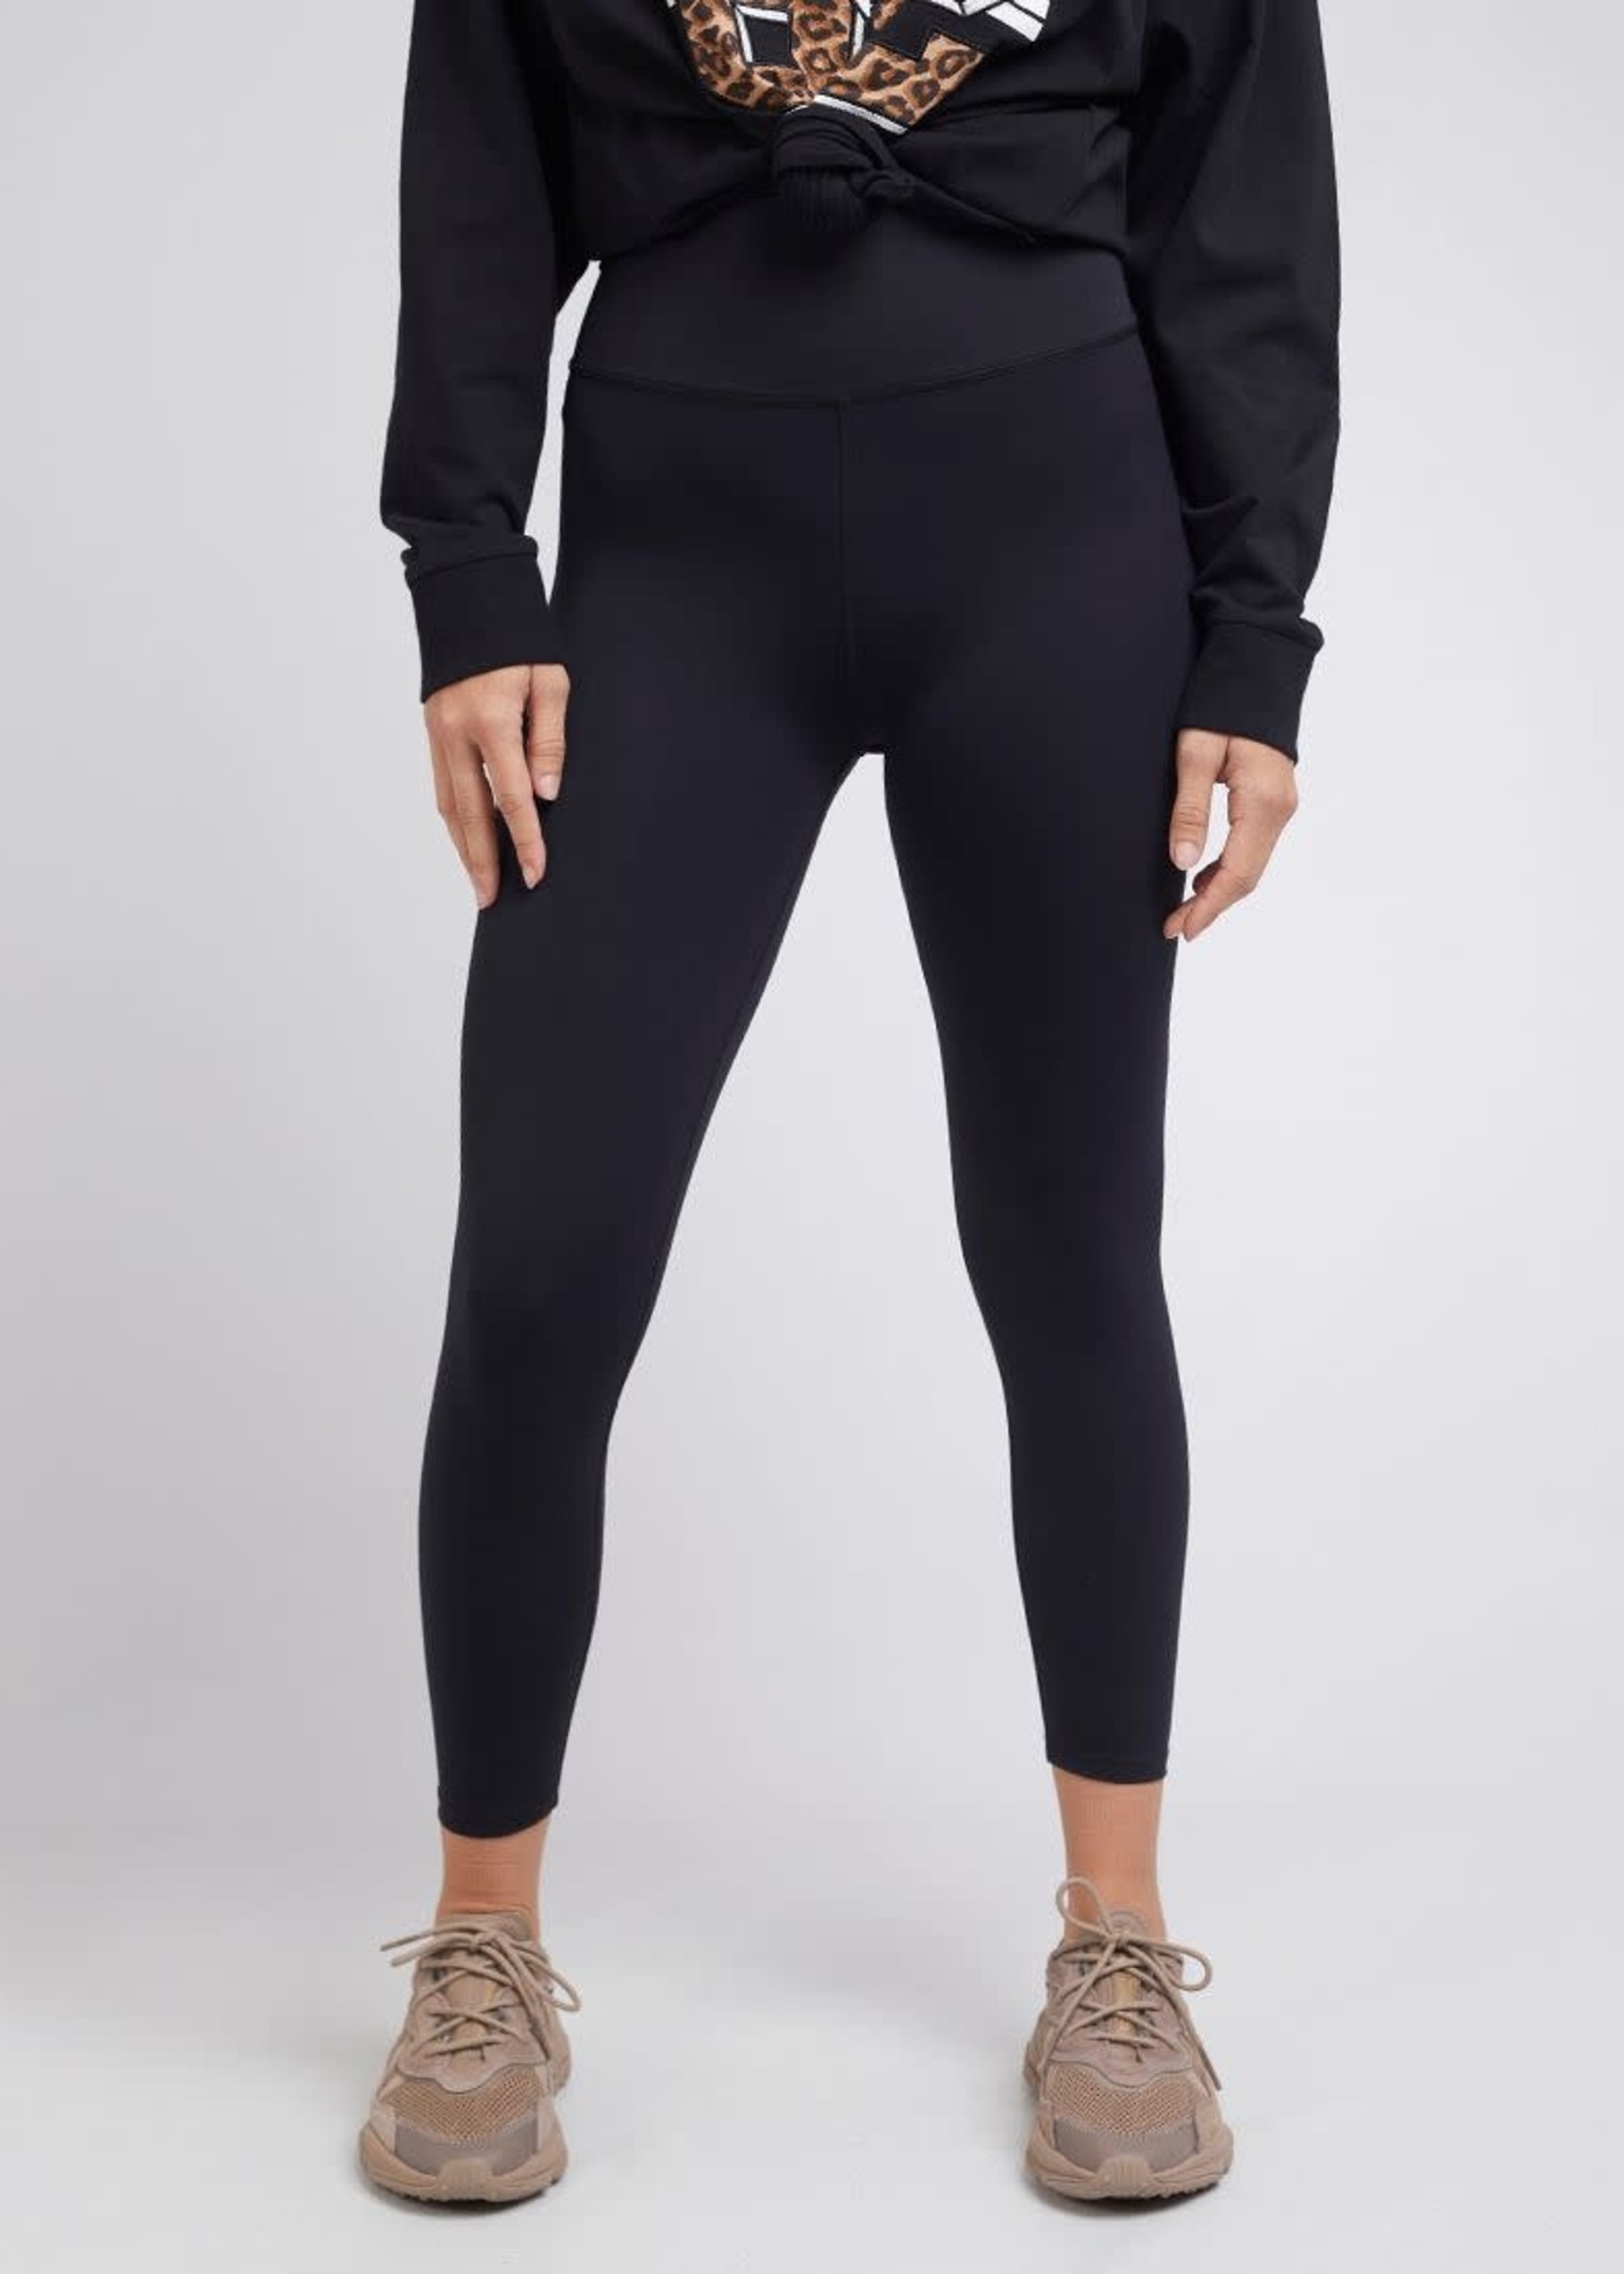 All About Eve Carter Legging